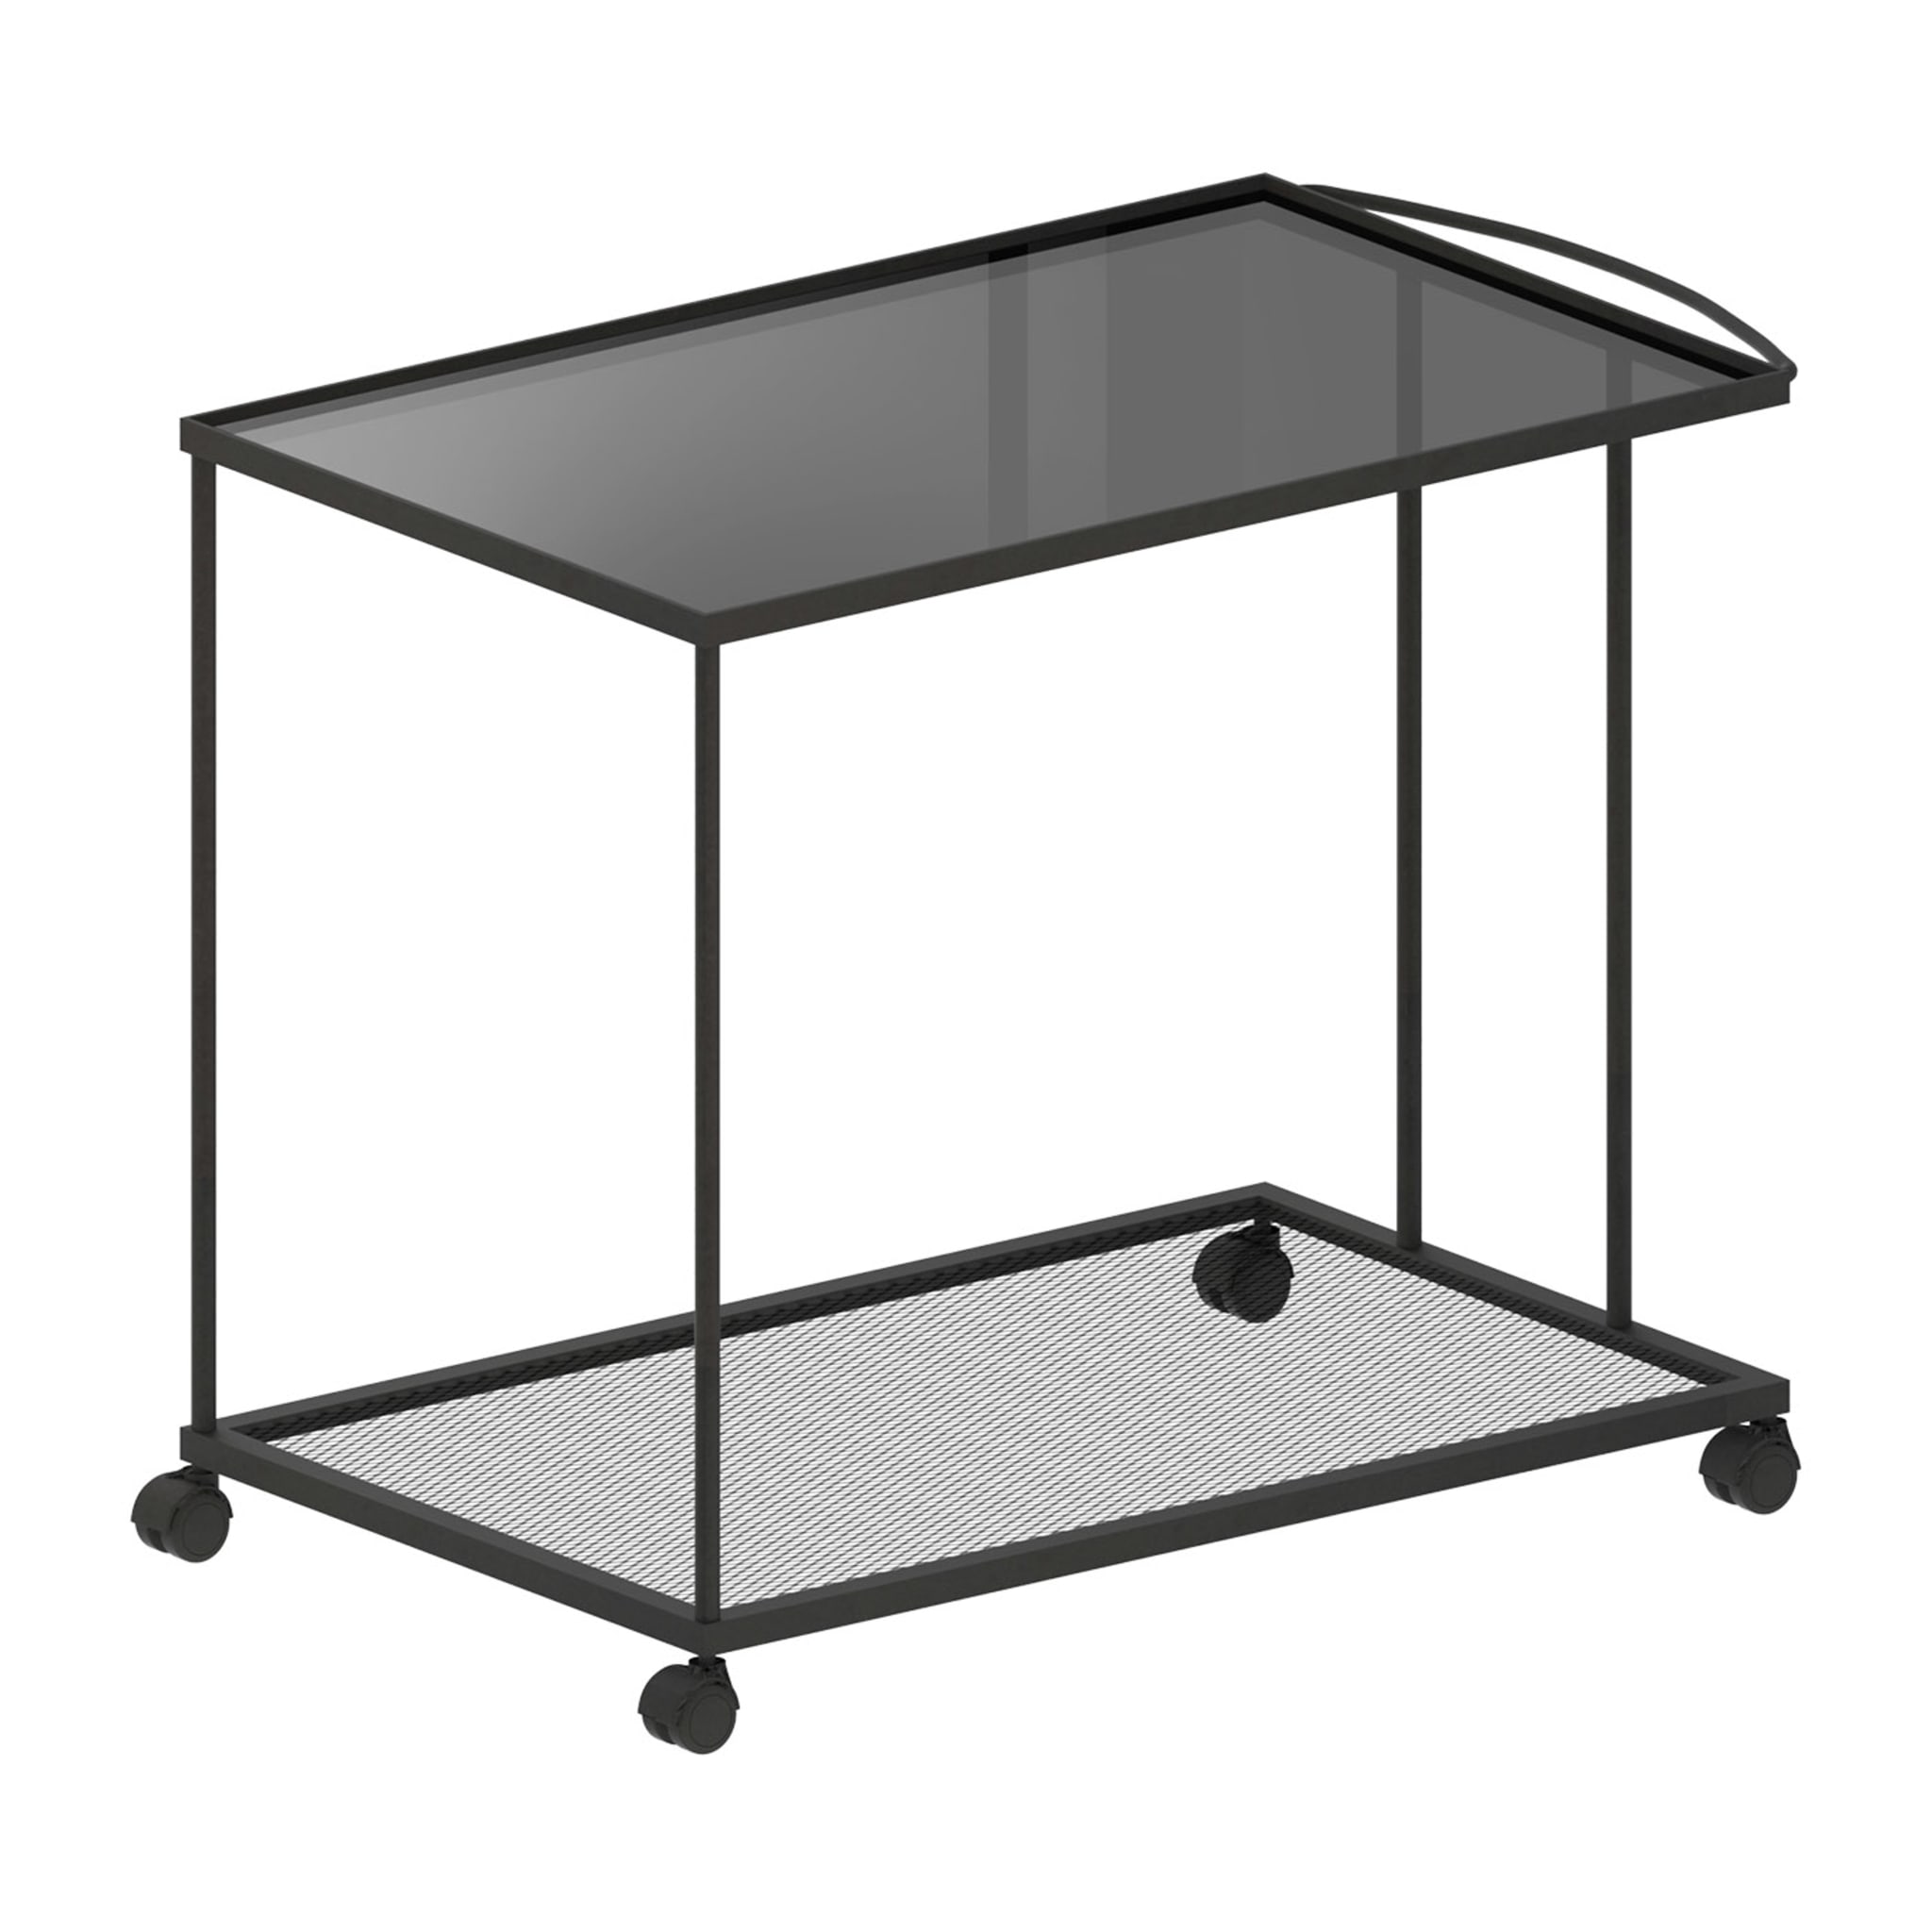 Tristano Serving Cart by Maurizio Peregalli - Main view